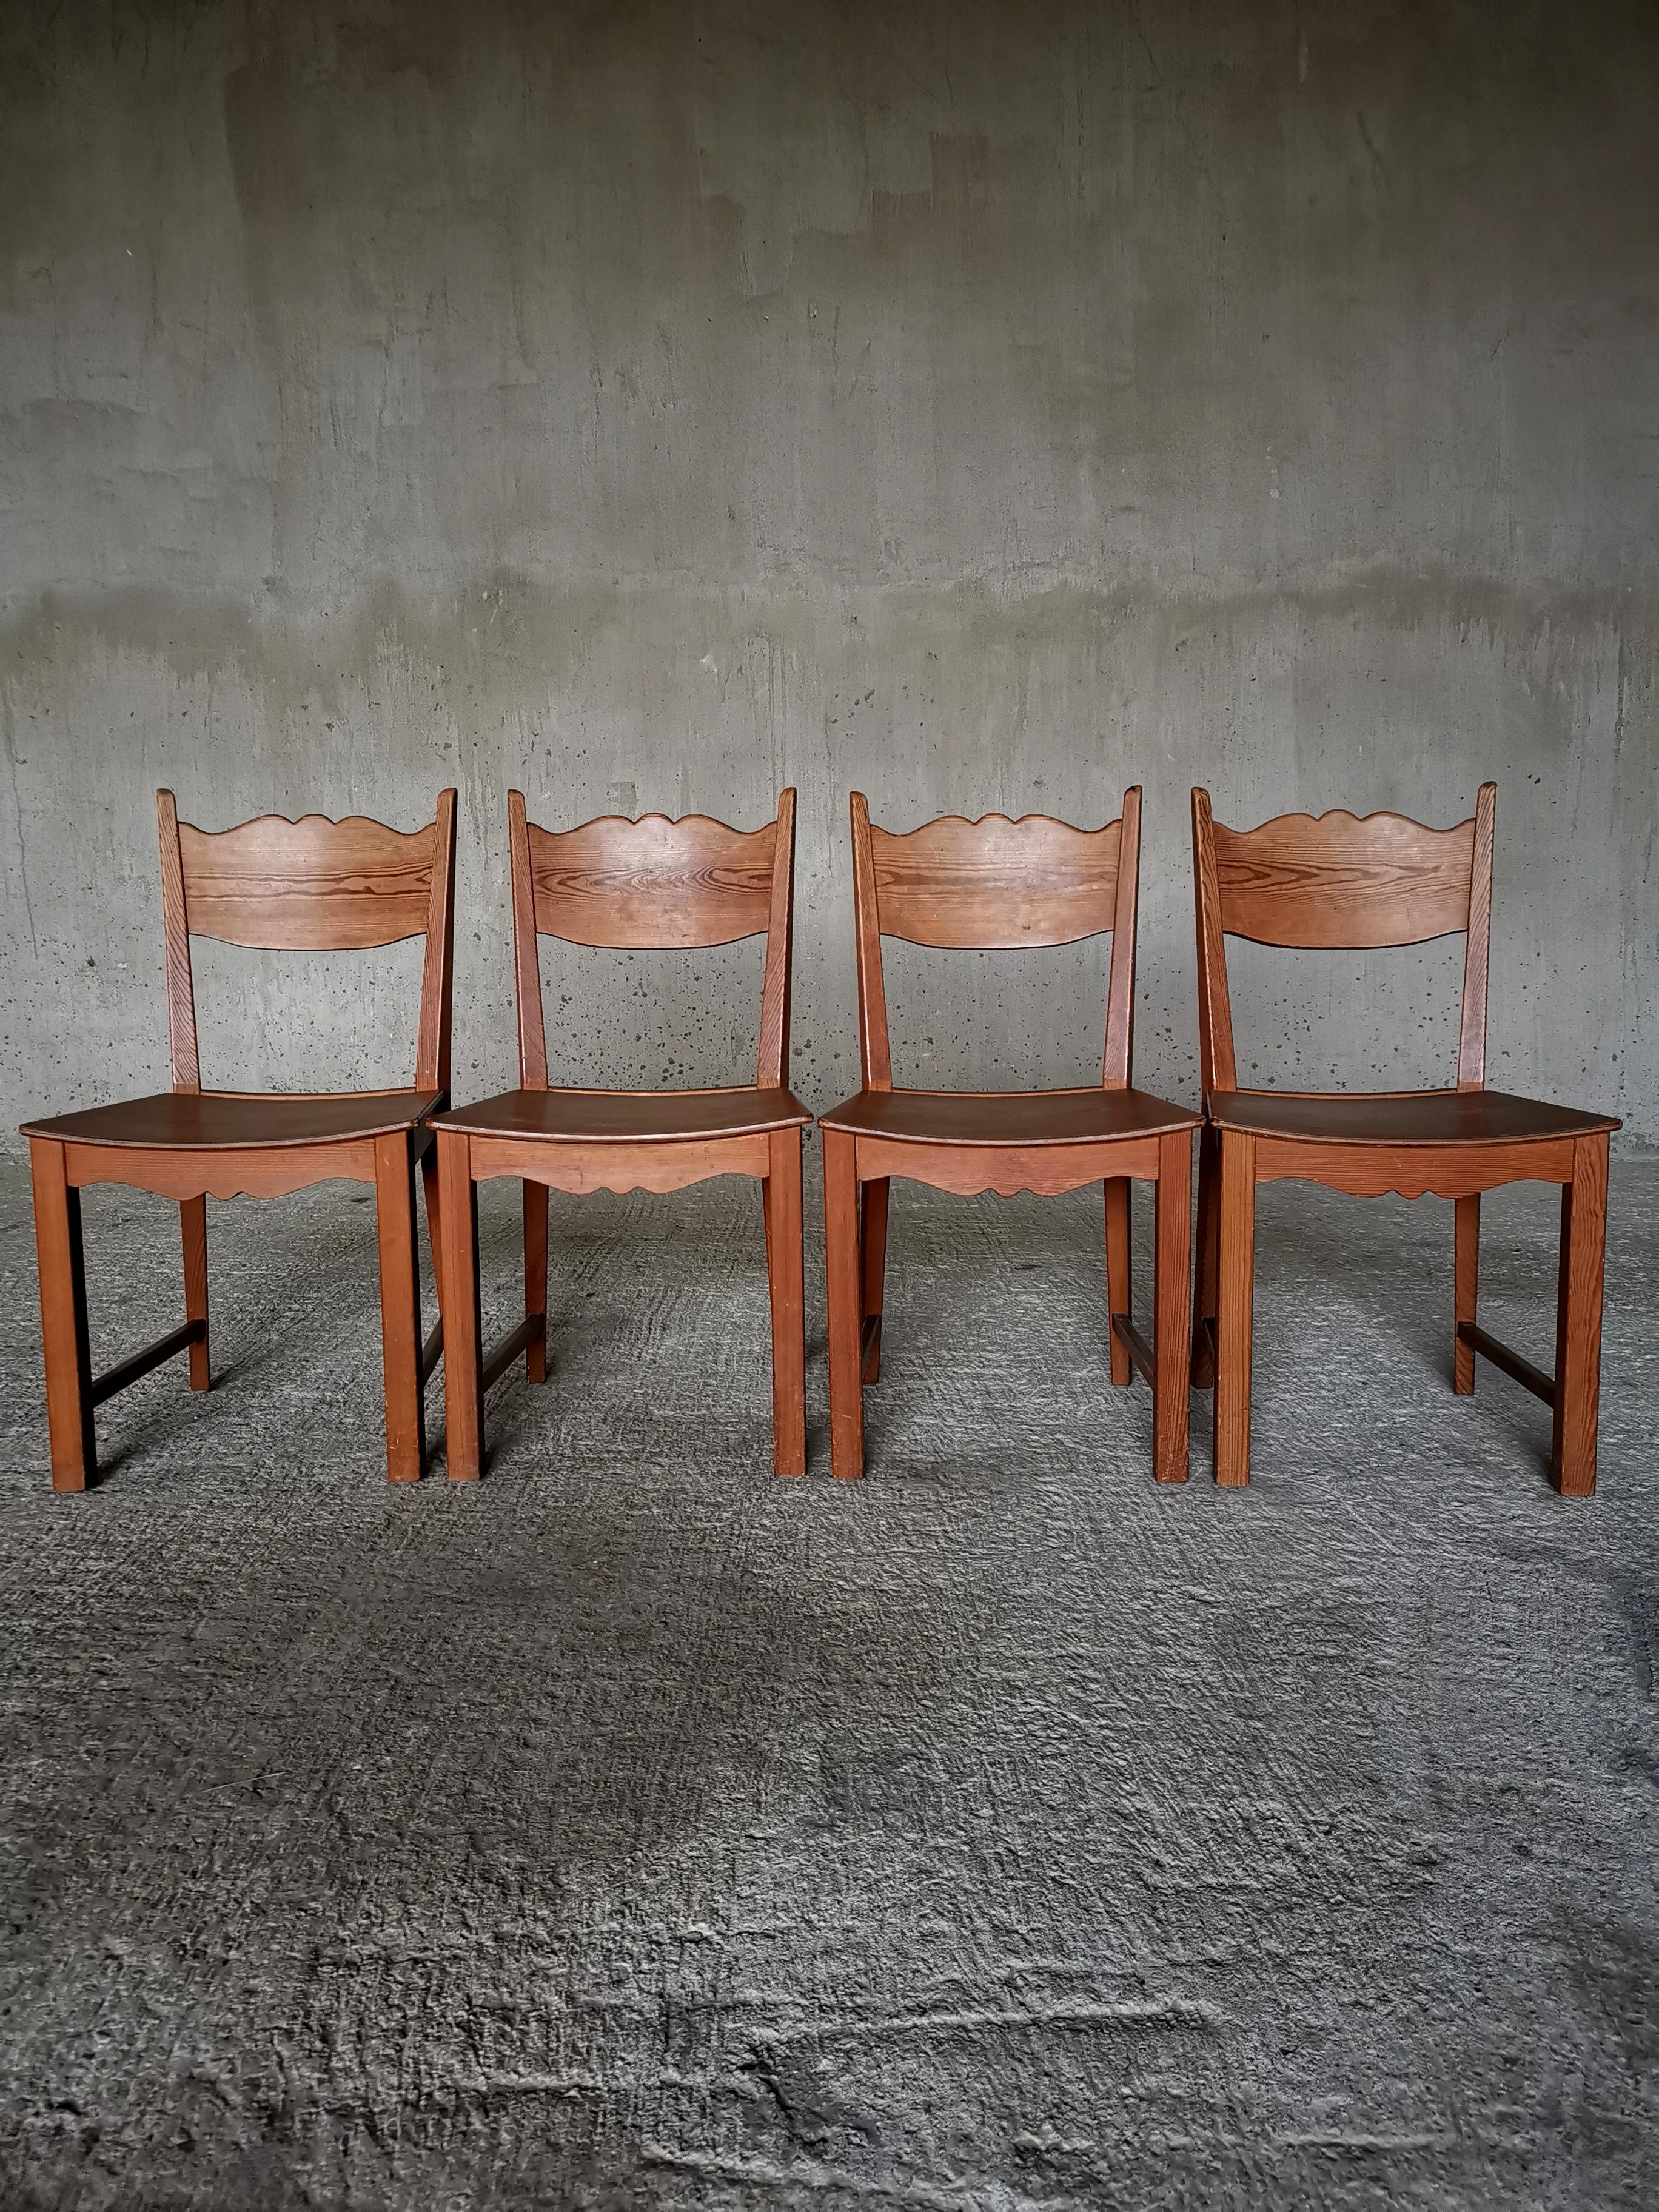 Set of 4 dining chairs in solid pine, style of Axel Einar Hjorth's 